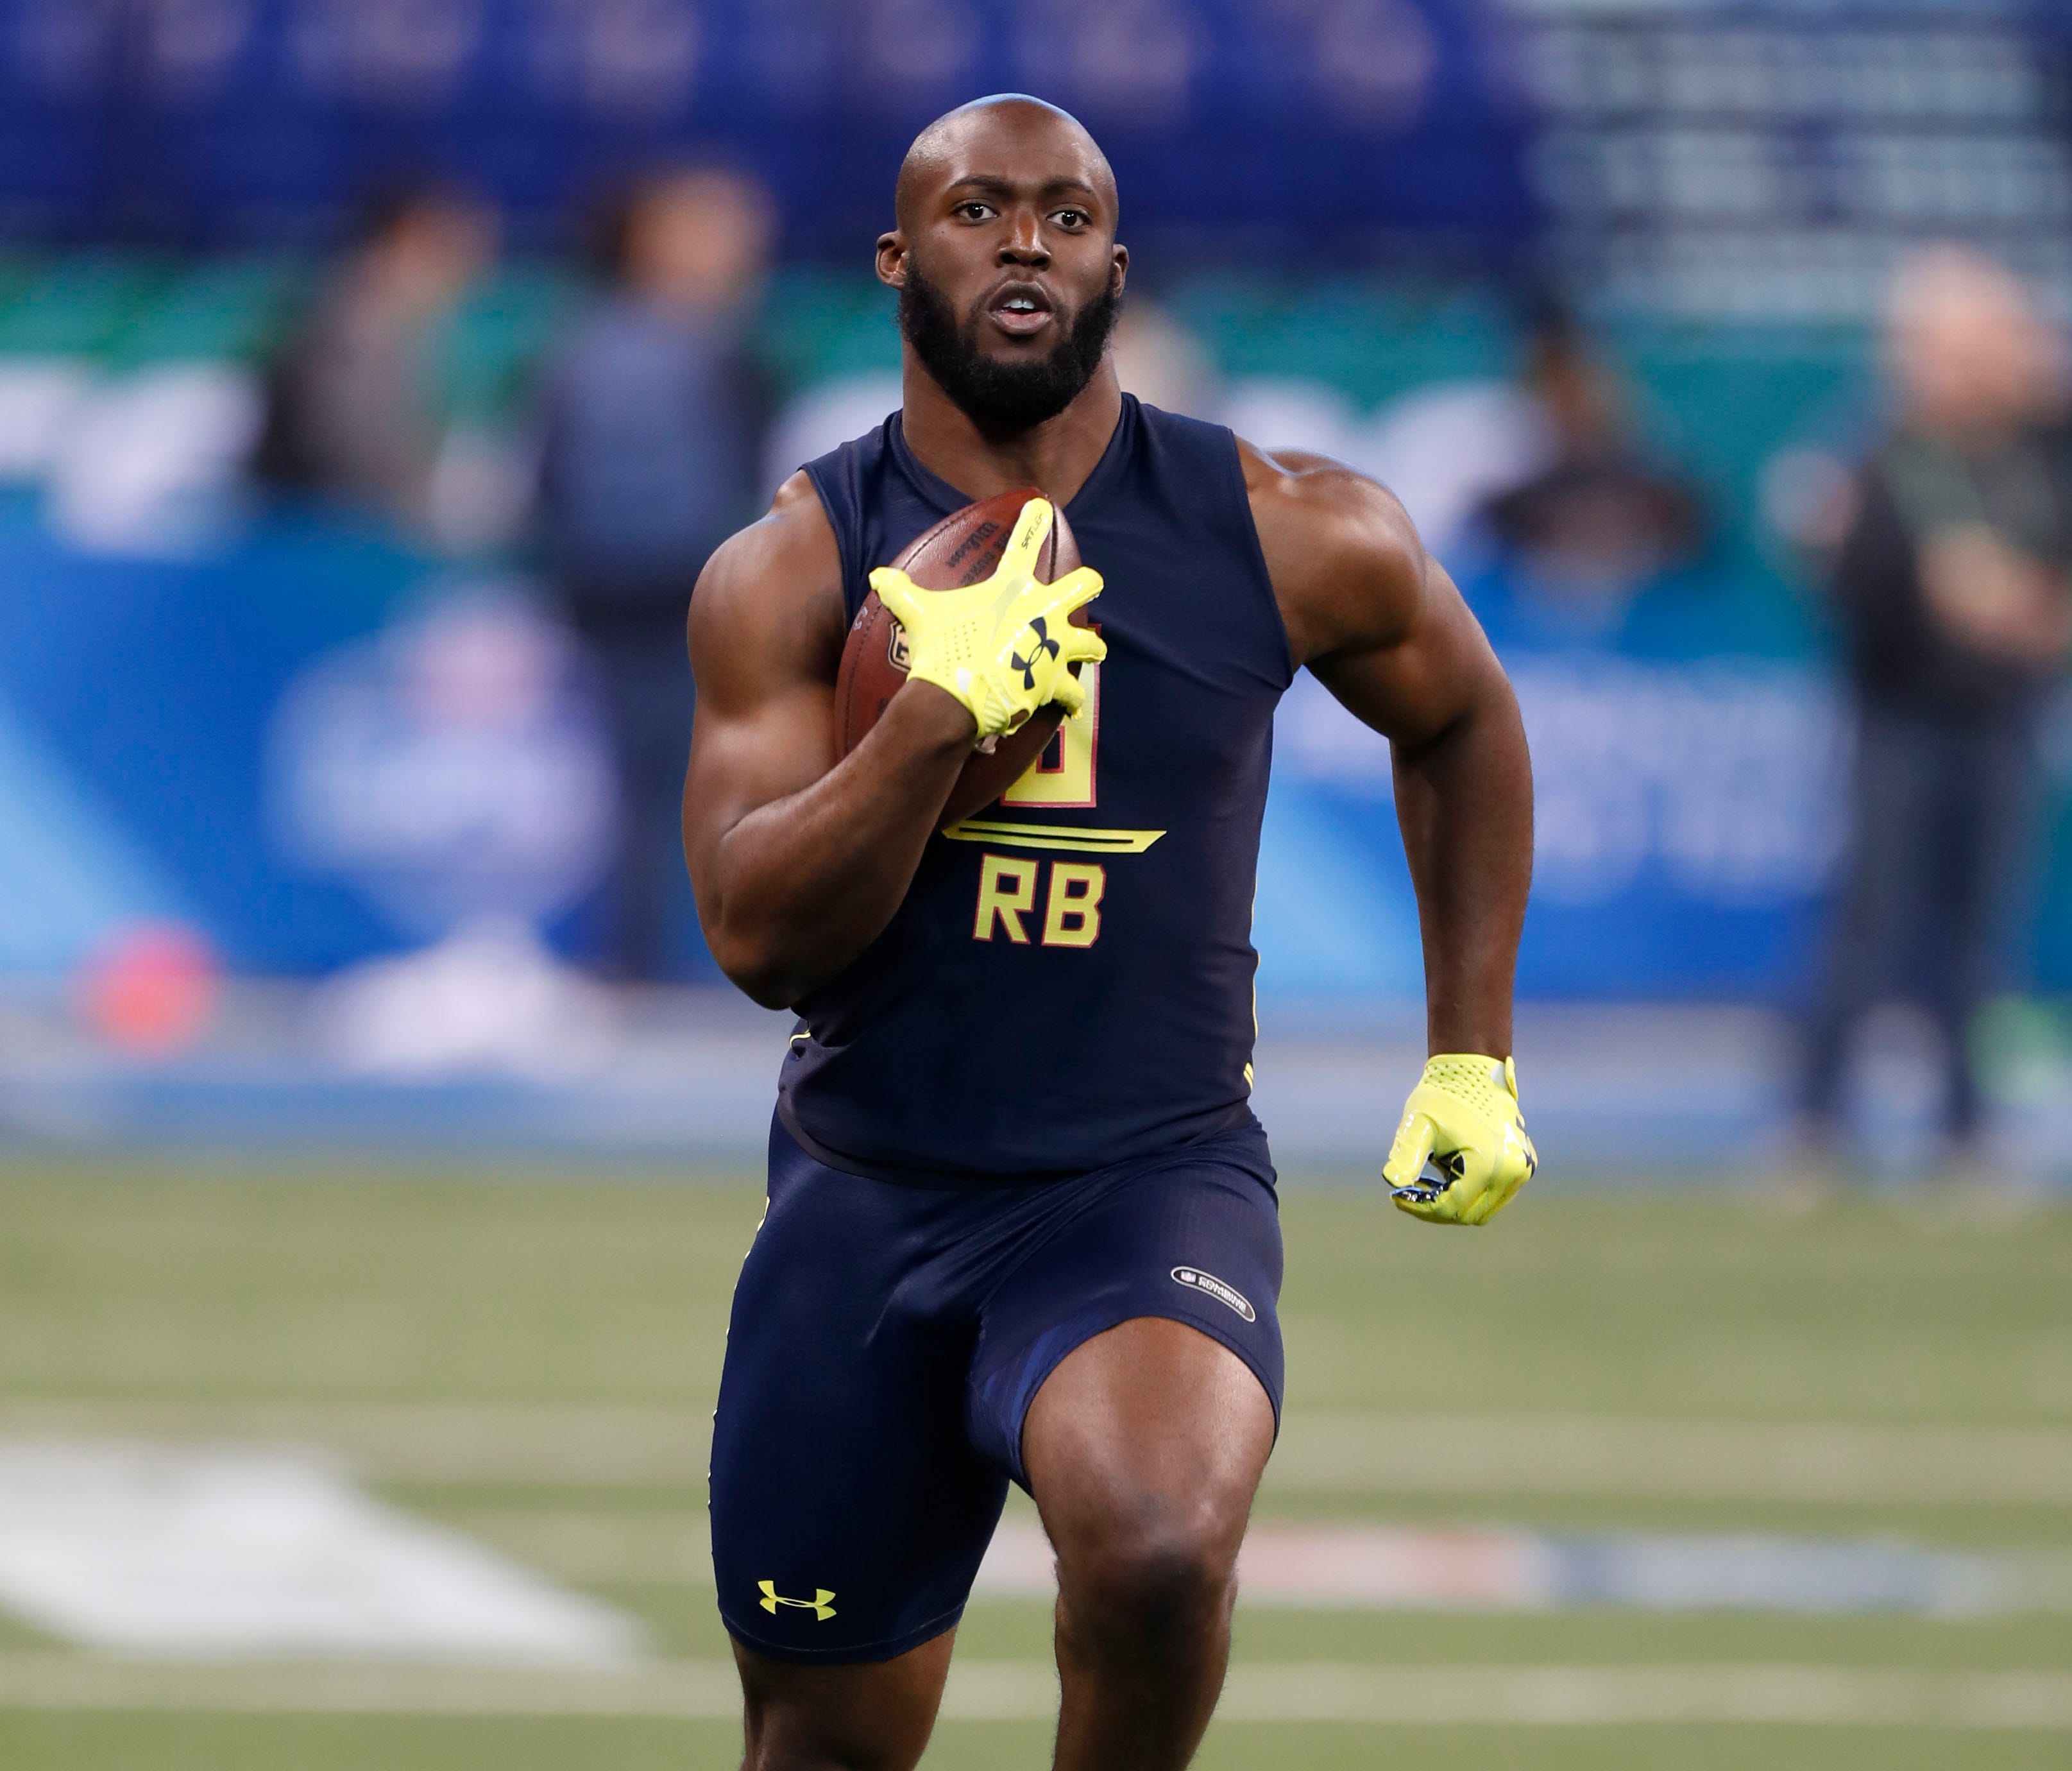 LSU Tigers running back Leonard Fournette goes through workout drills during the 2017 NFL Combine at Lucas Oil Stadium.